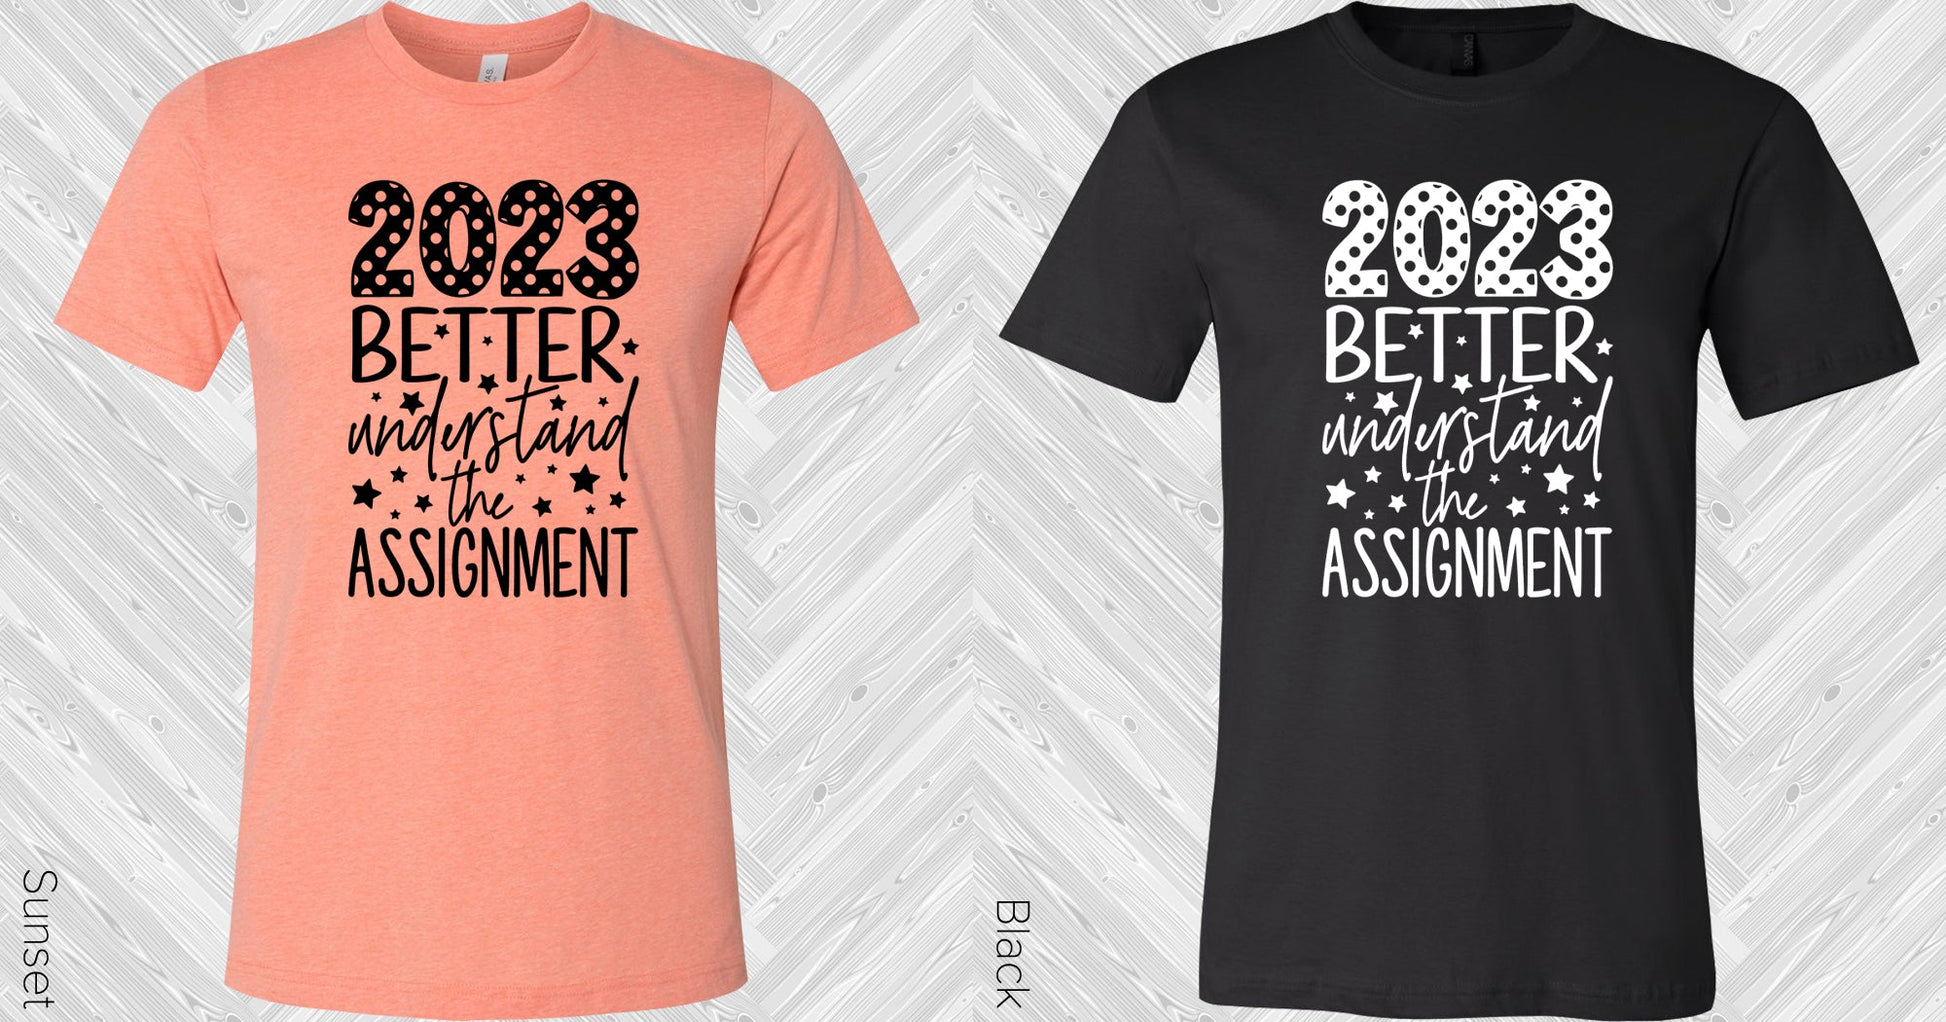 2023 Better Understand The Assignment Graphic Tee Graphic Tee